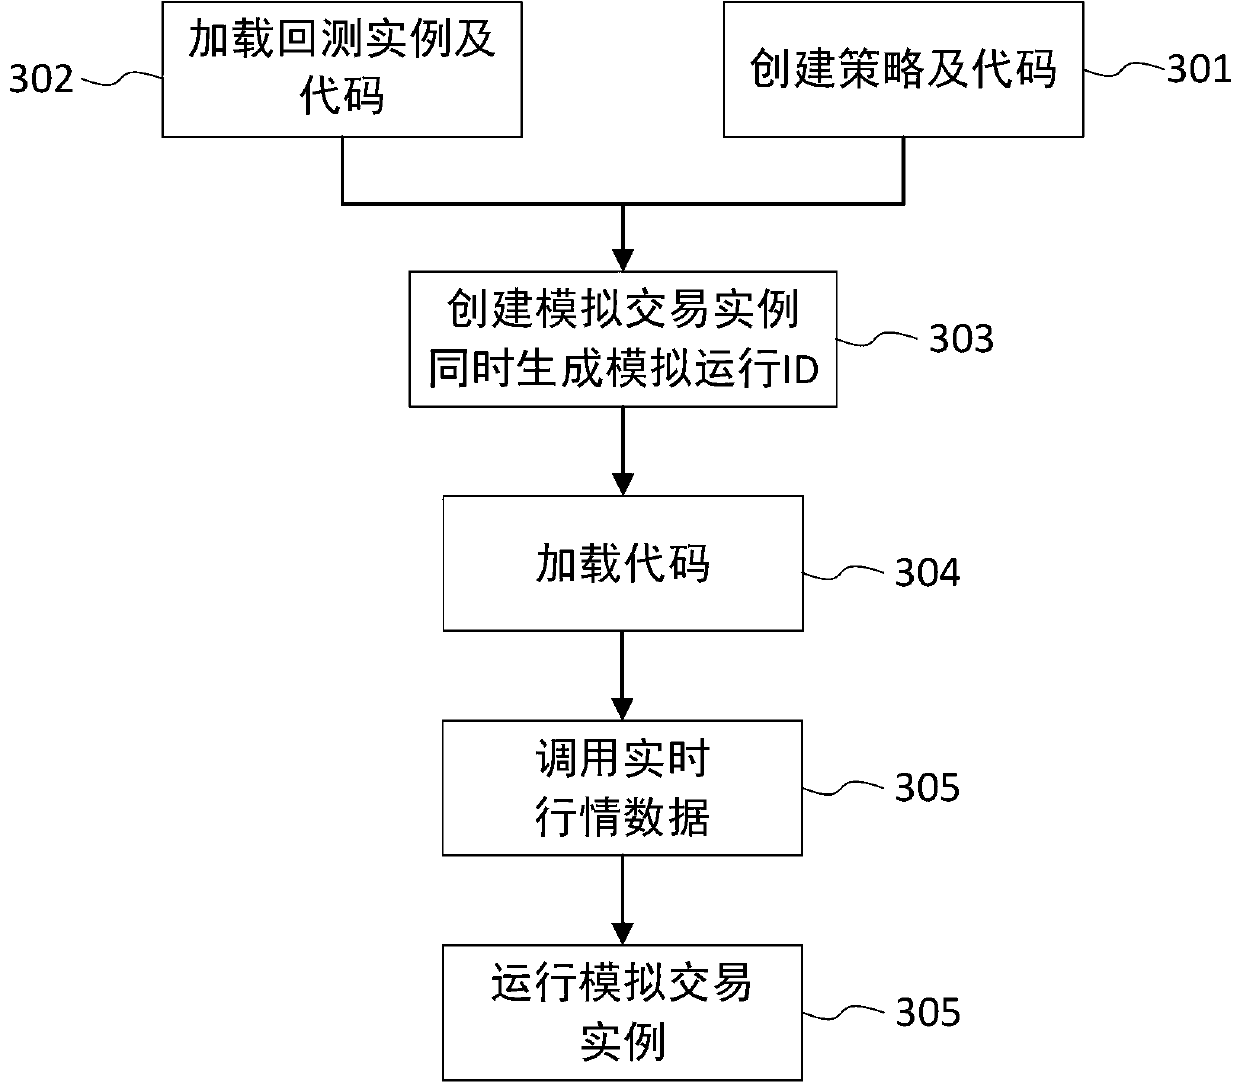 A method and a system device based on a remote connection operation strategy